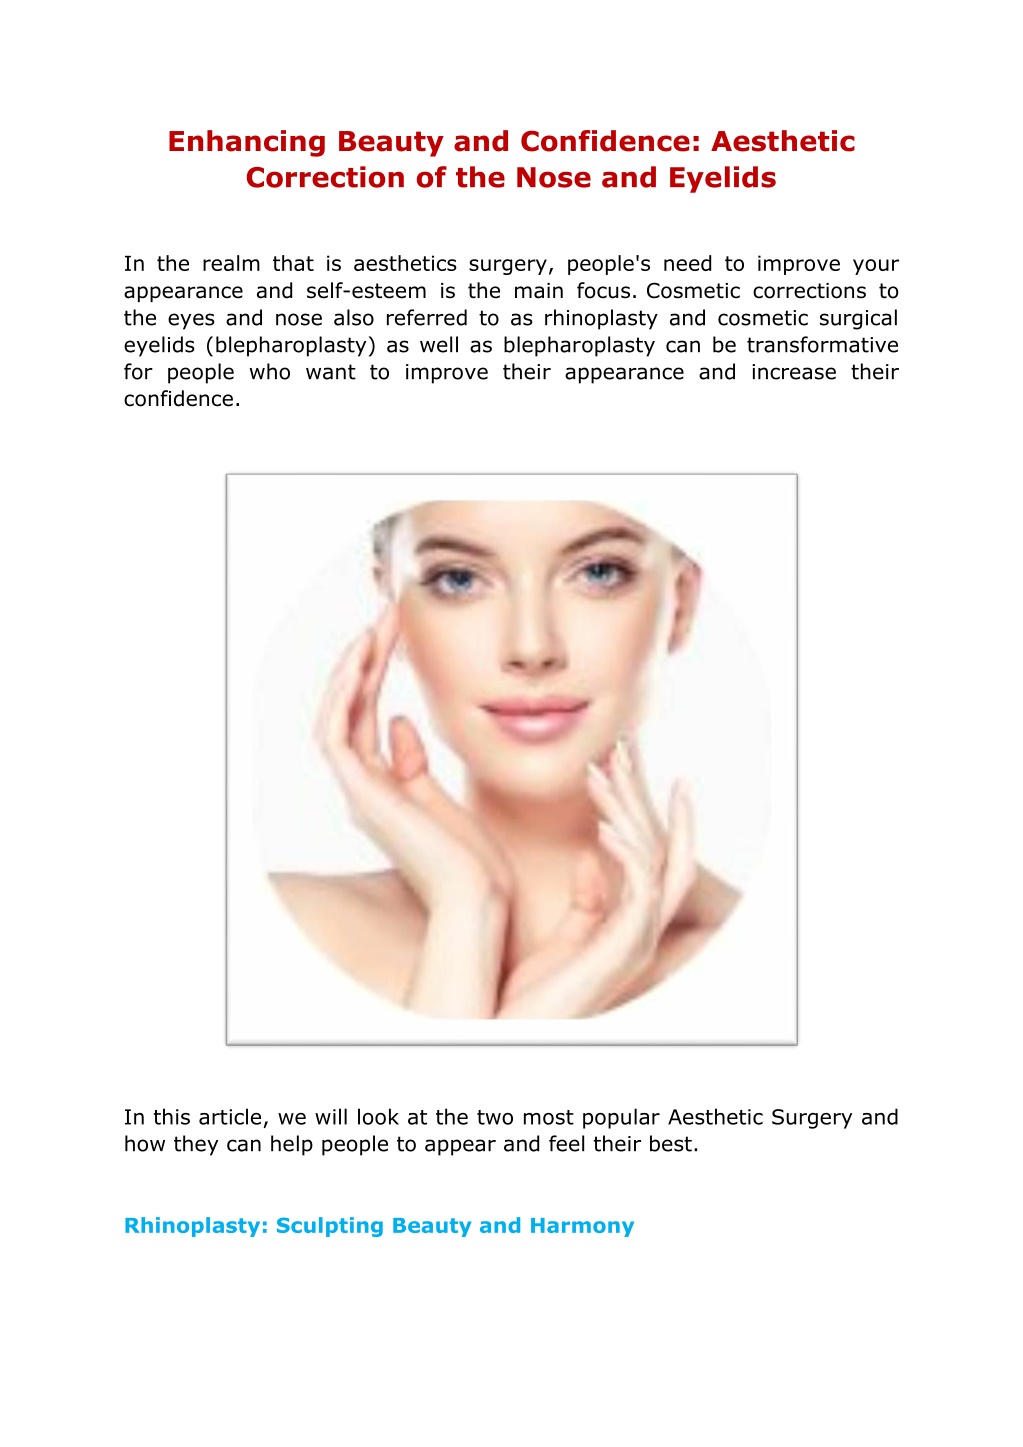 PPT - Enhancing Beauty and Confidence Aesthetic Correction of the Nose ...